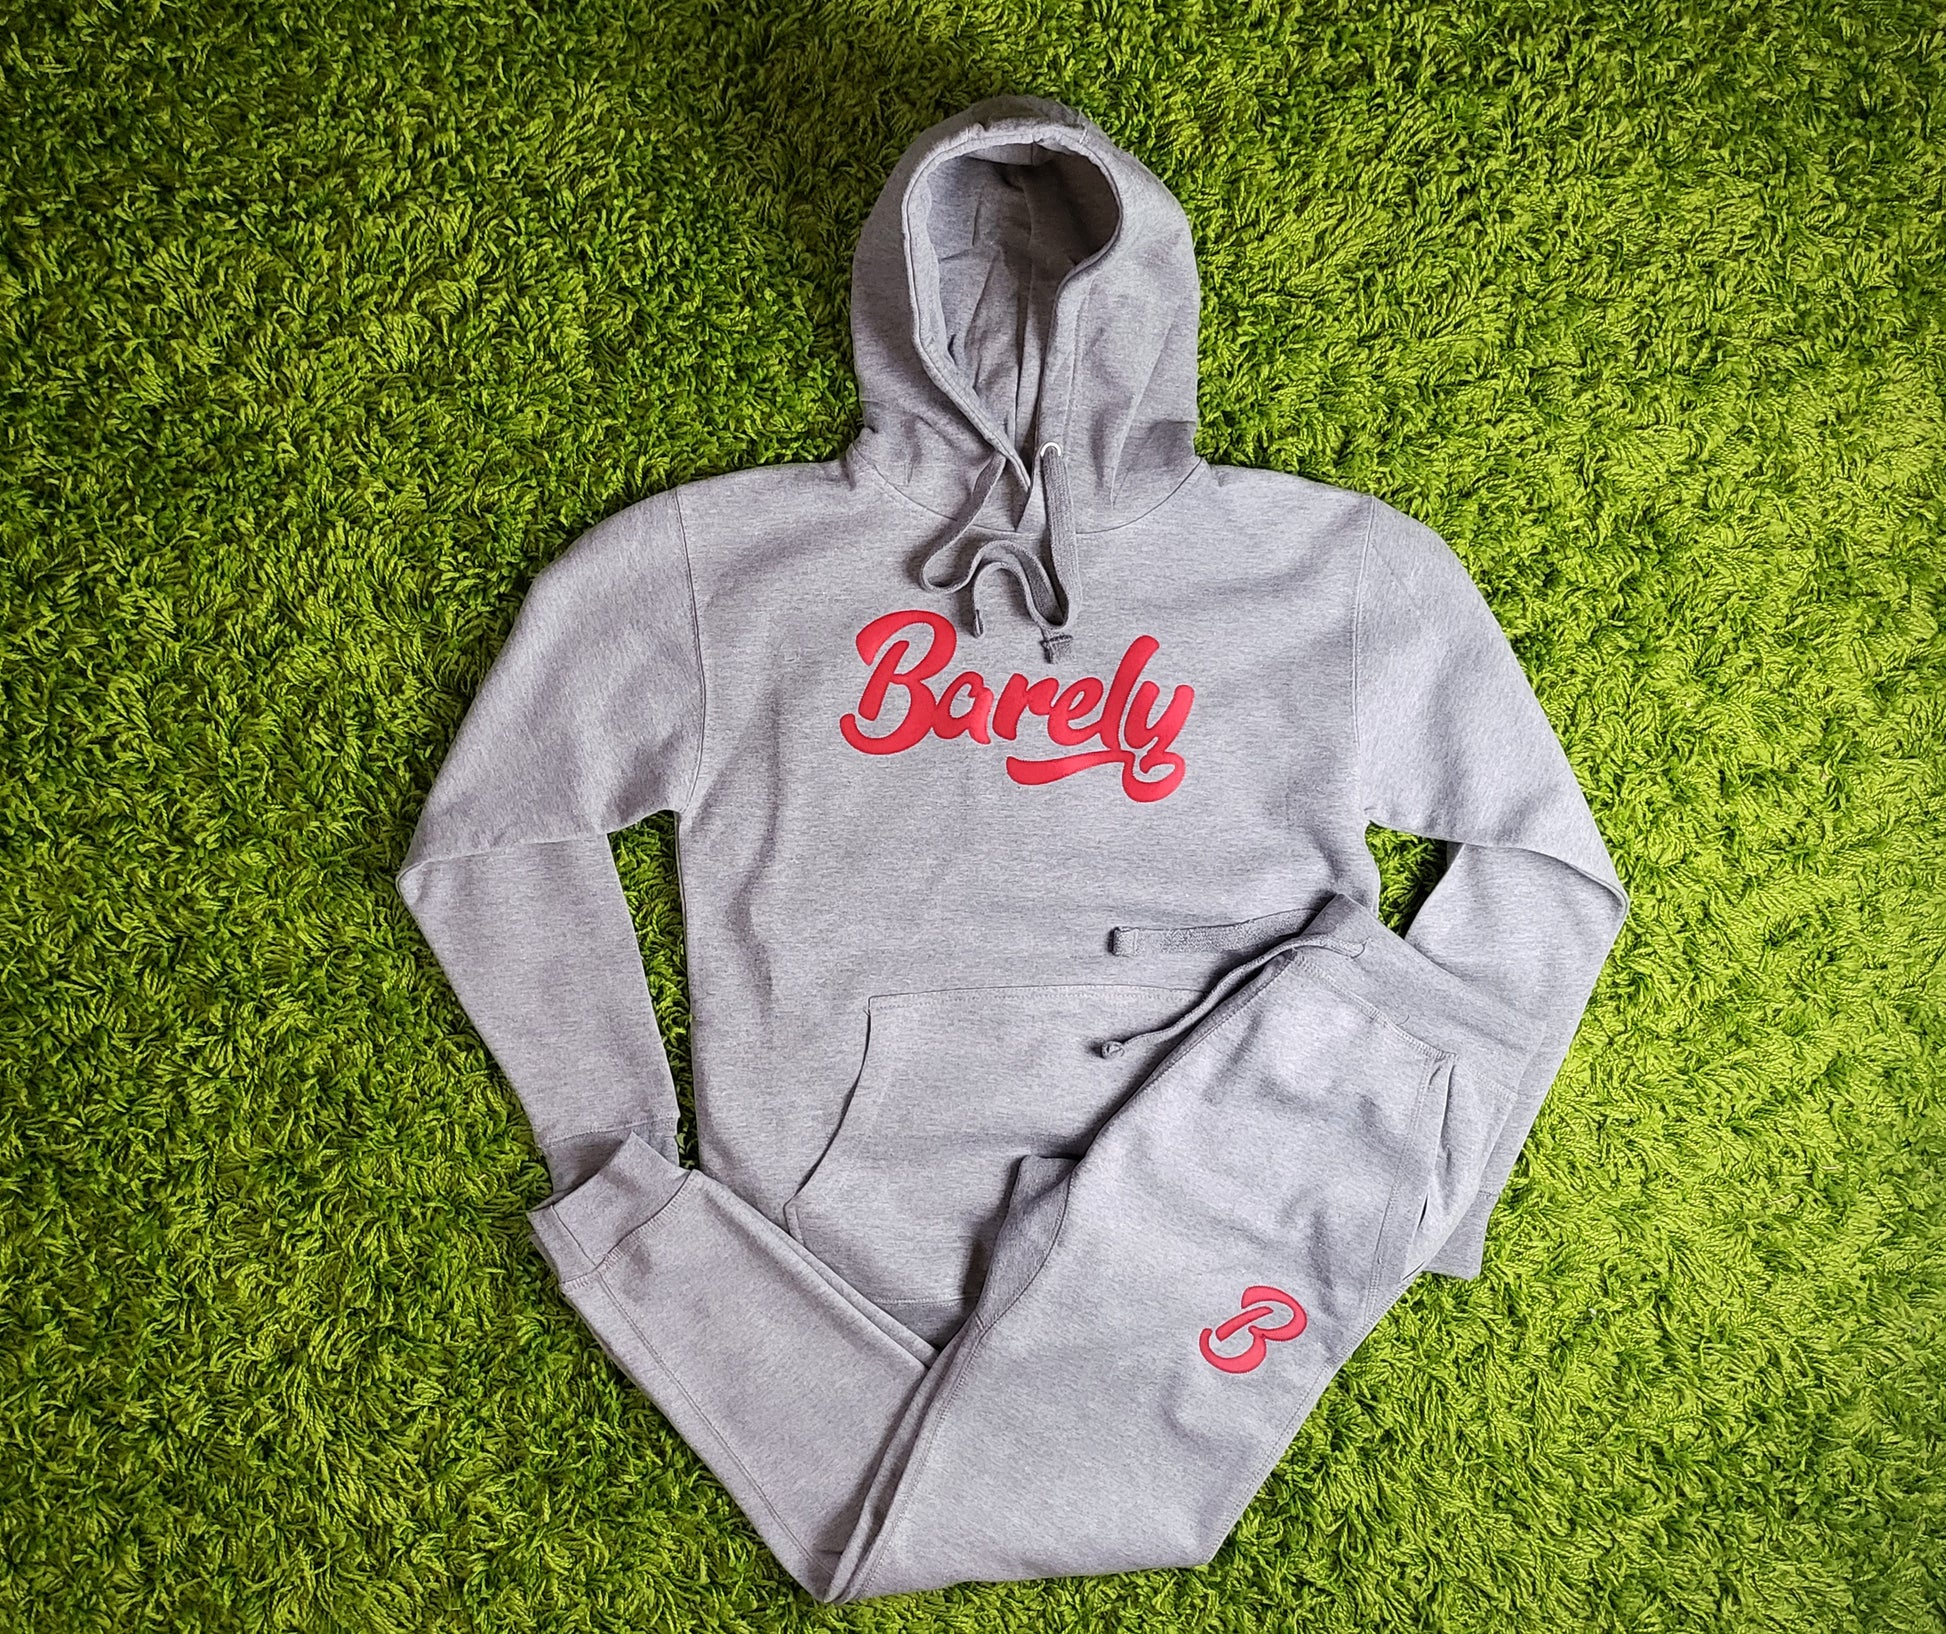 Barely "B" Logo Joggers (Gry/Red) - Barely Ordinary